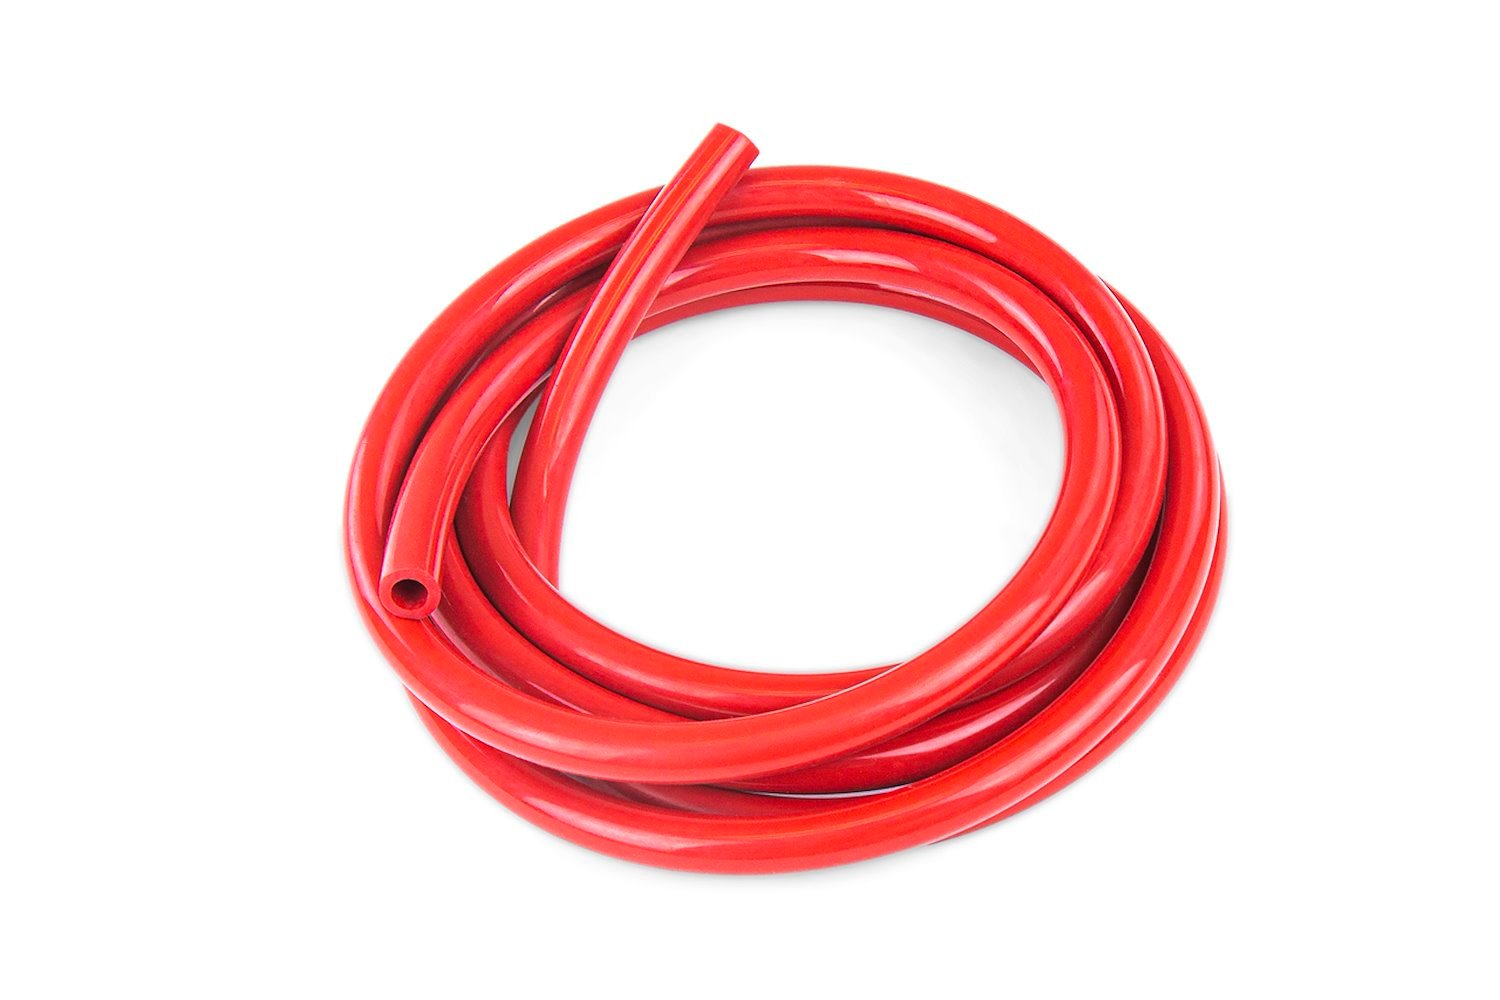 HTSVH7-REDx5 High-Temperature Silicone Vacuum Hose Tubing, 9/32 in. ID, 5 ft. Roll, Red